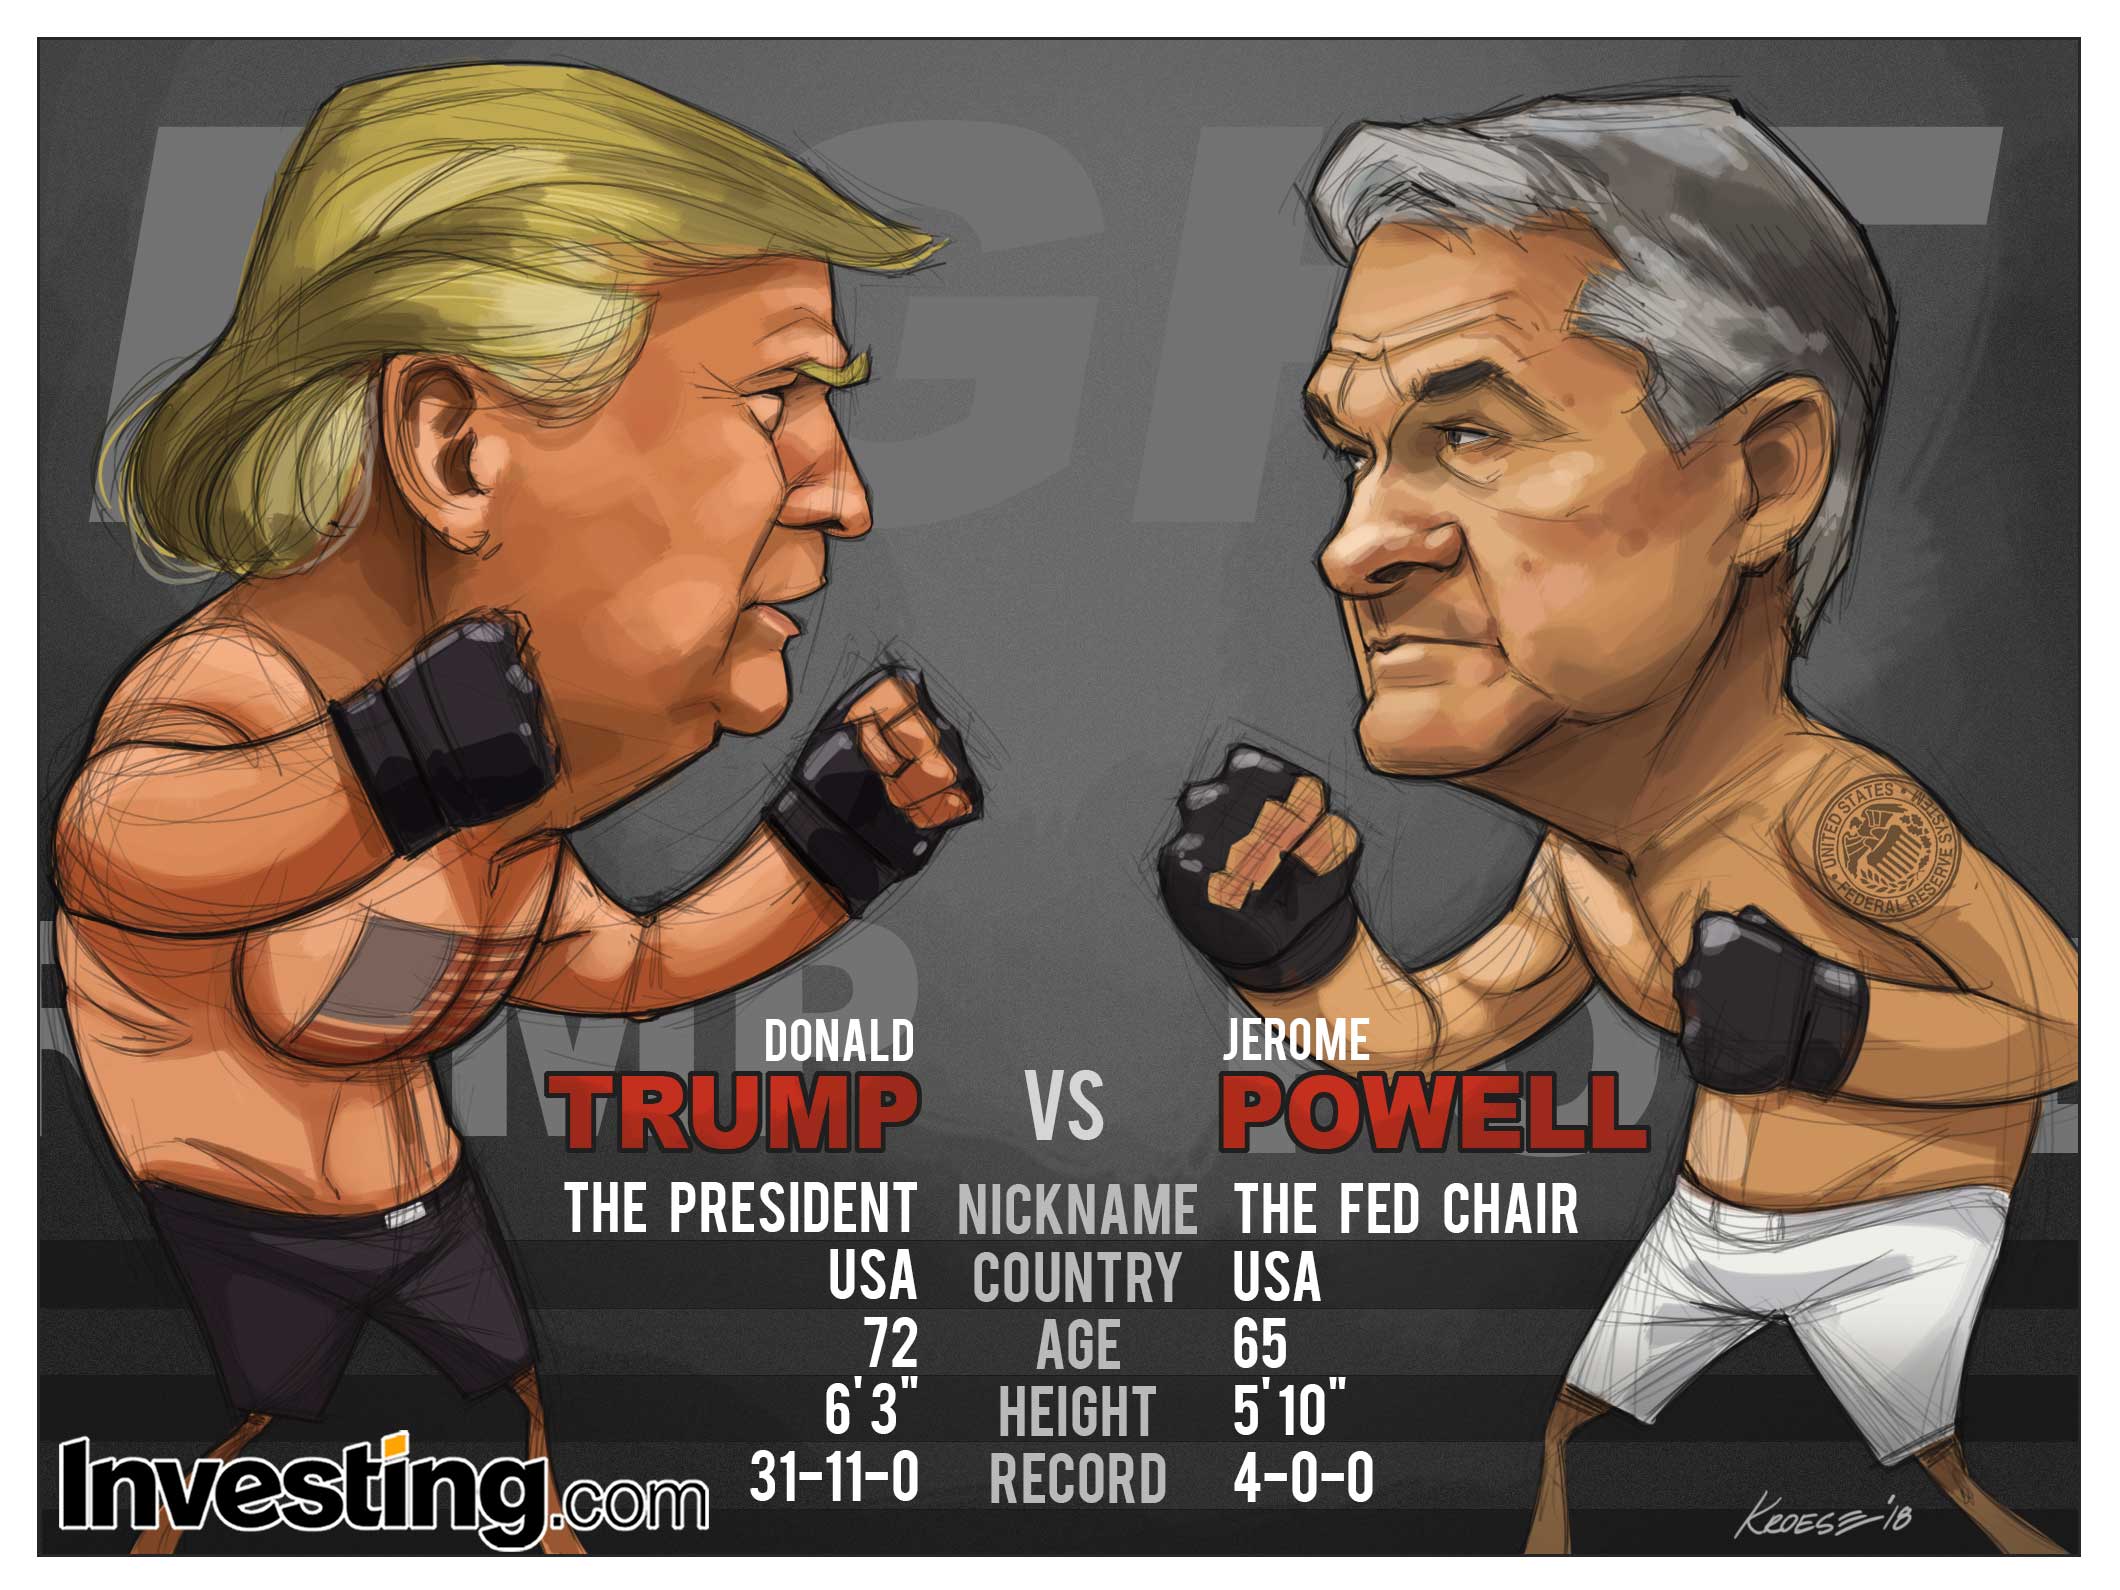 Powell sticks to rate hike message despite Trump's verbal attacks. Their fight looks set to continue in 2019